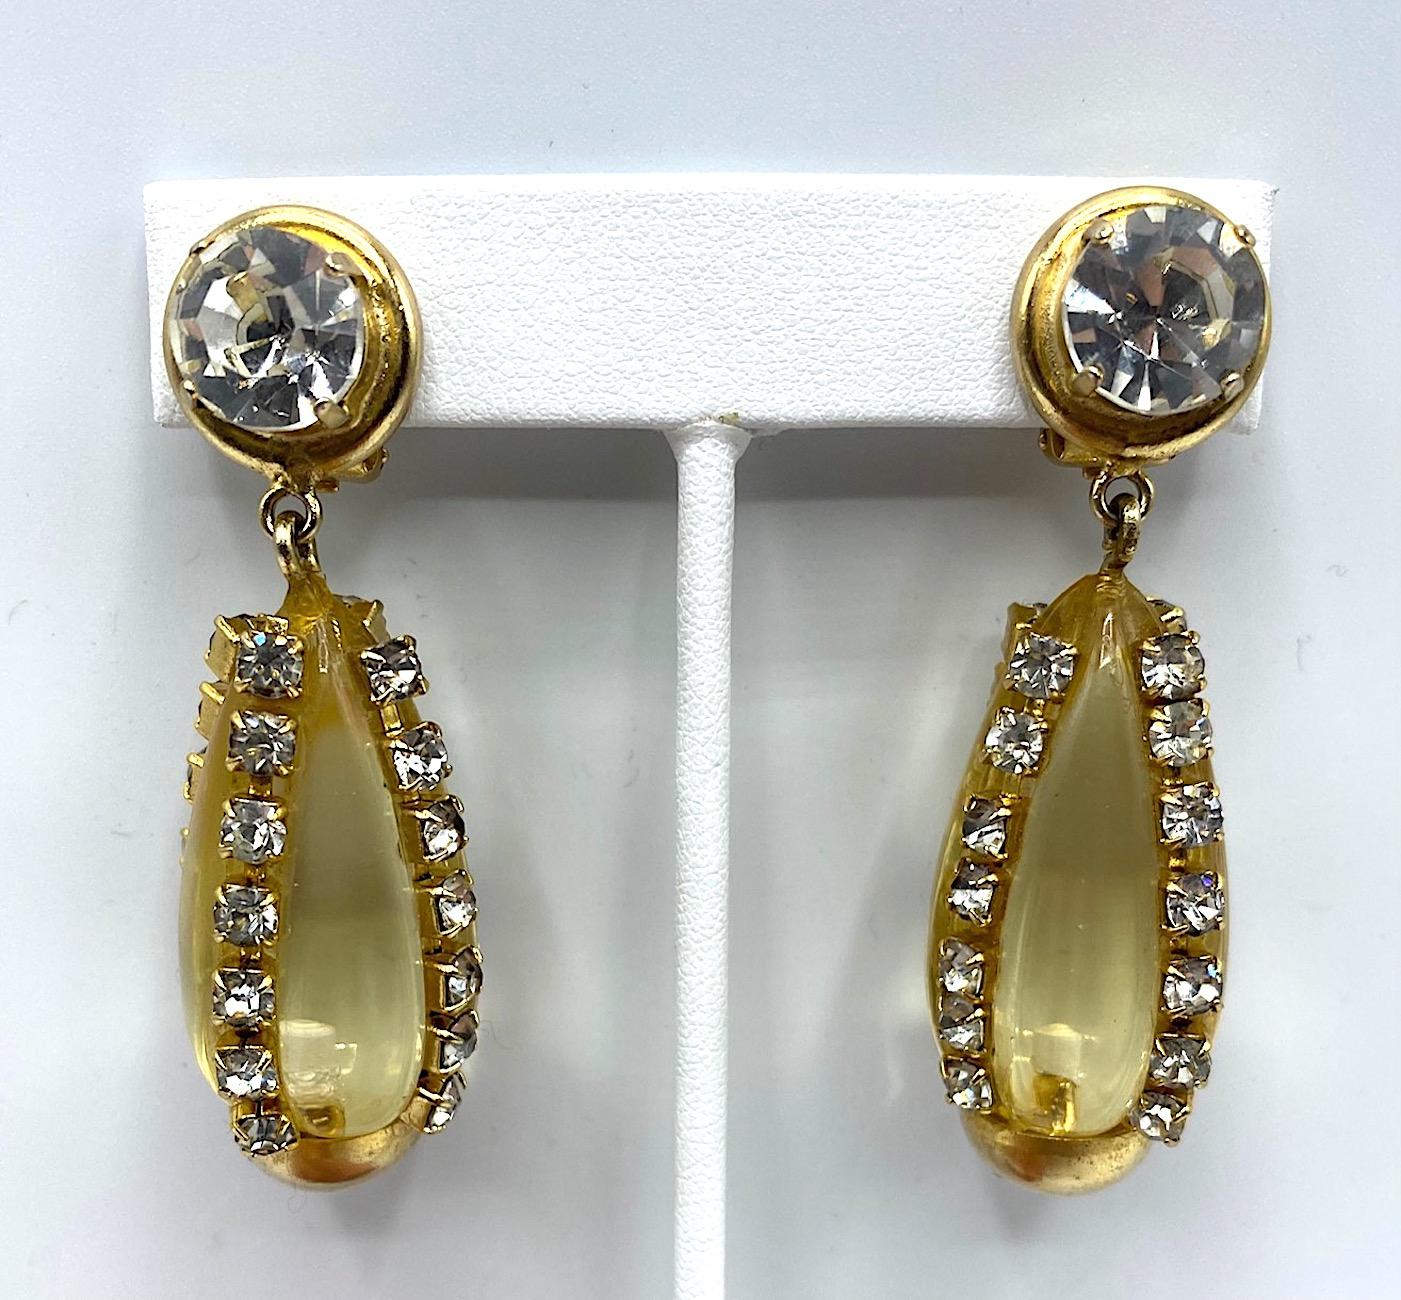 A lovely pair of Italian gold, rhinestone and lucite earrings by Italian fashion jewelry house Sharra Pagano. Each earring is gold plate and clip back. The top pieces has a single large rhinestone mounted in a round button setting .5 of an inch in